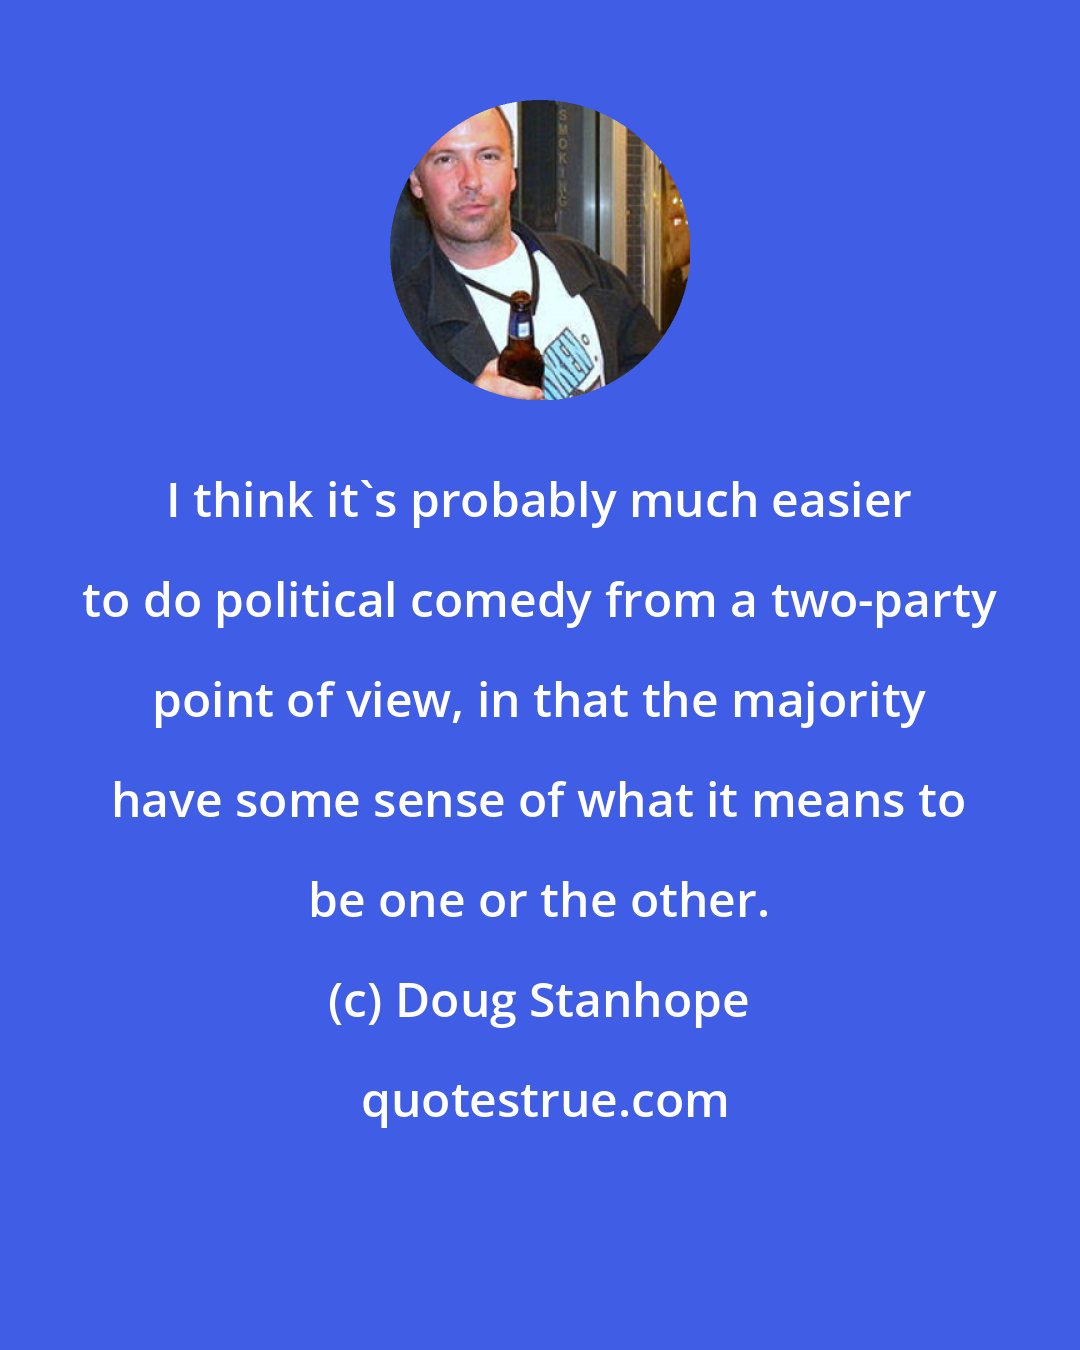 Doug Stanhope: I think it's probably much easier to do political comedy from a two-party point of view, in that the majority have some sense of what it means to be one or the other.